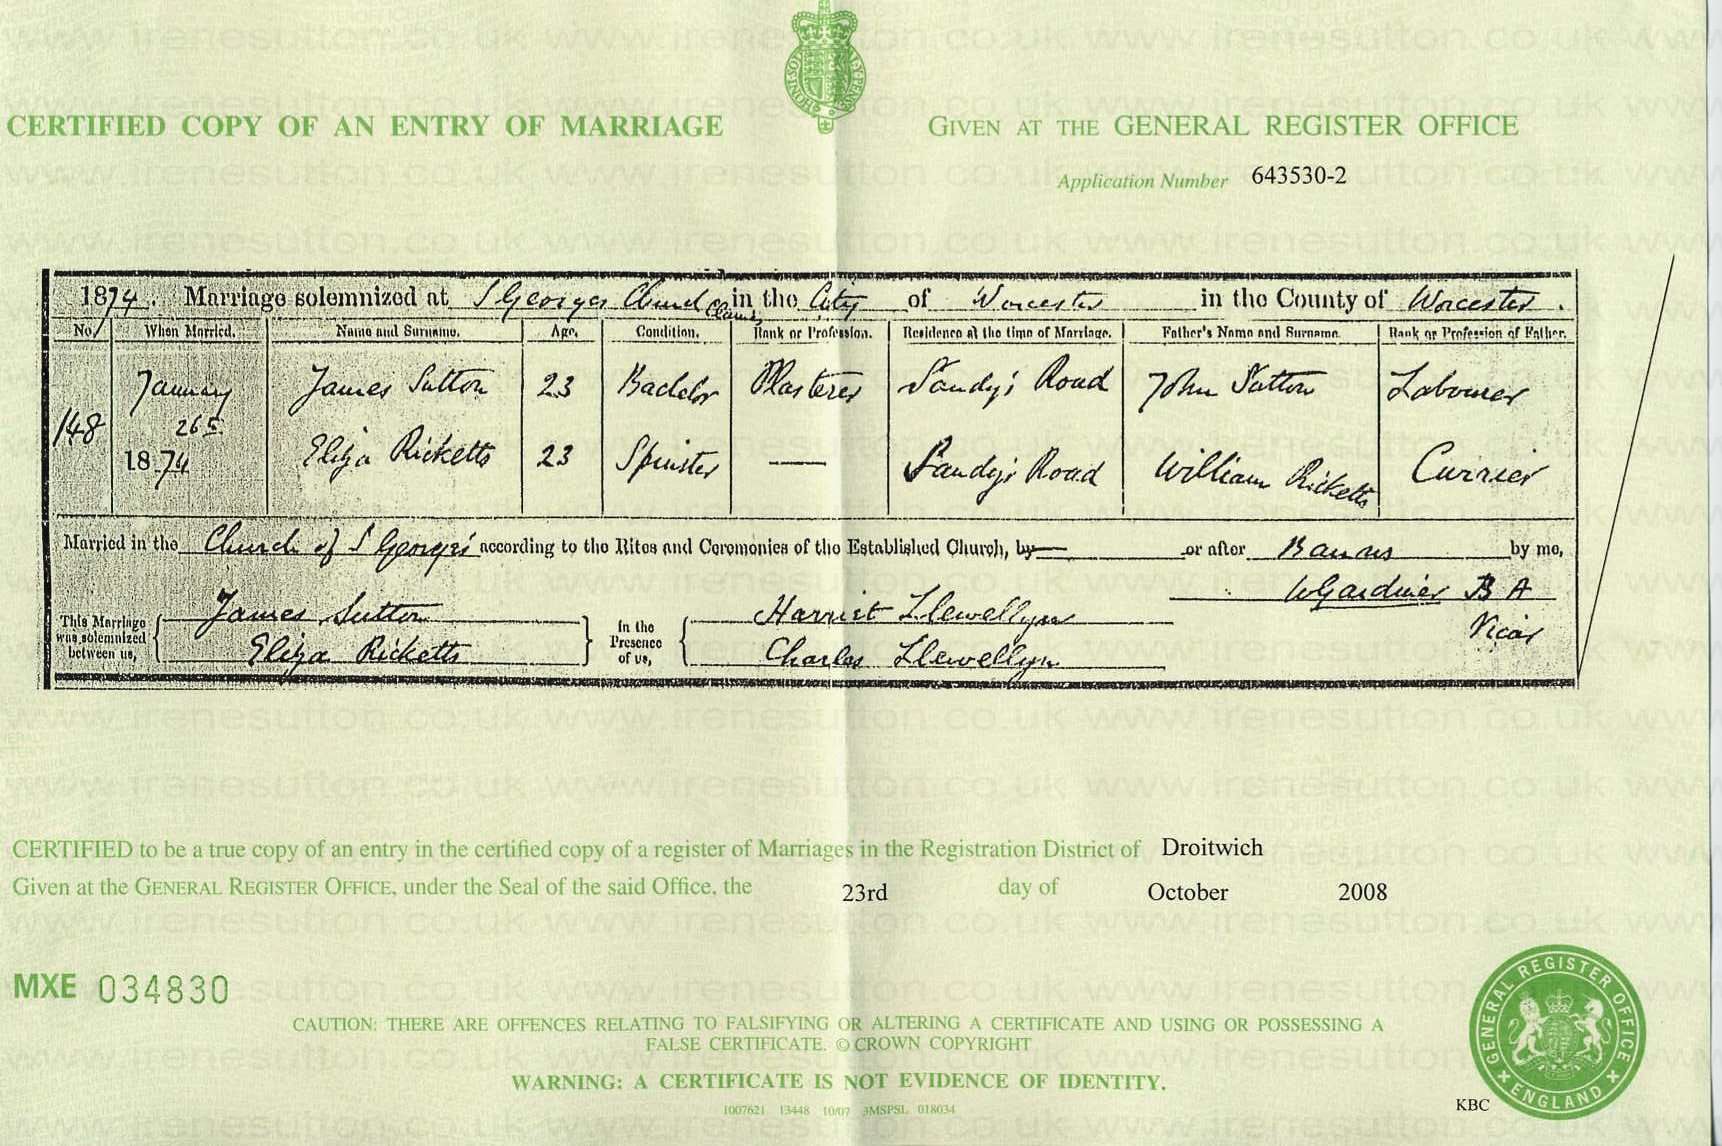  sourced from Marriage Certificate in the City of Worcester in the County of Worcester 034830 Entry No. 148.